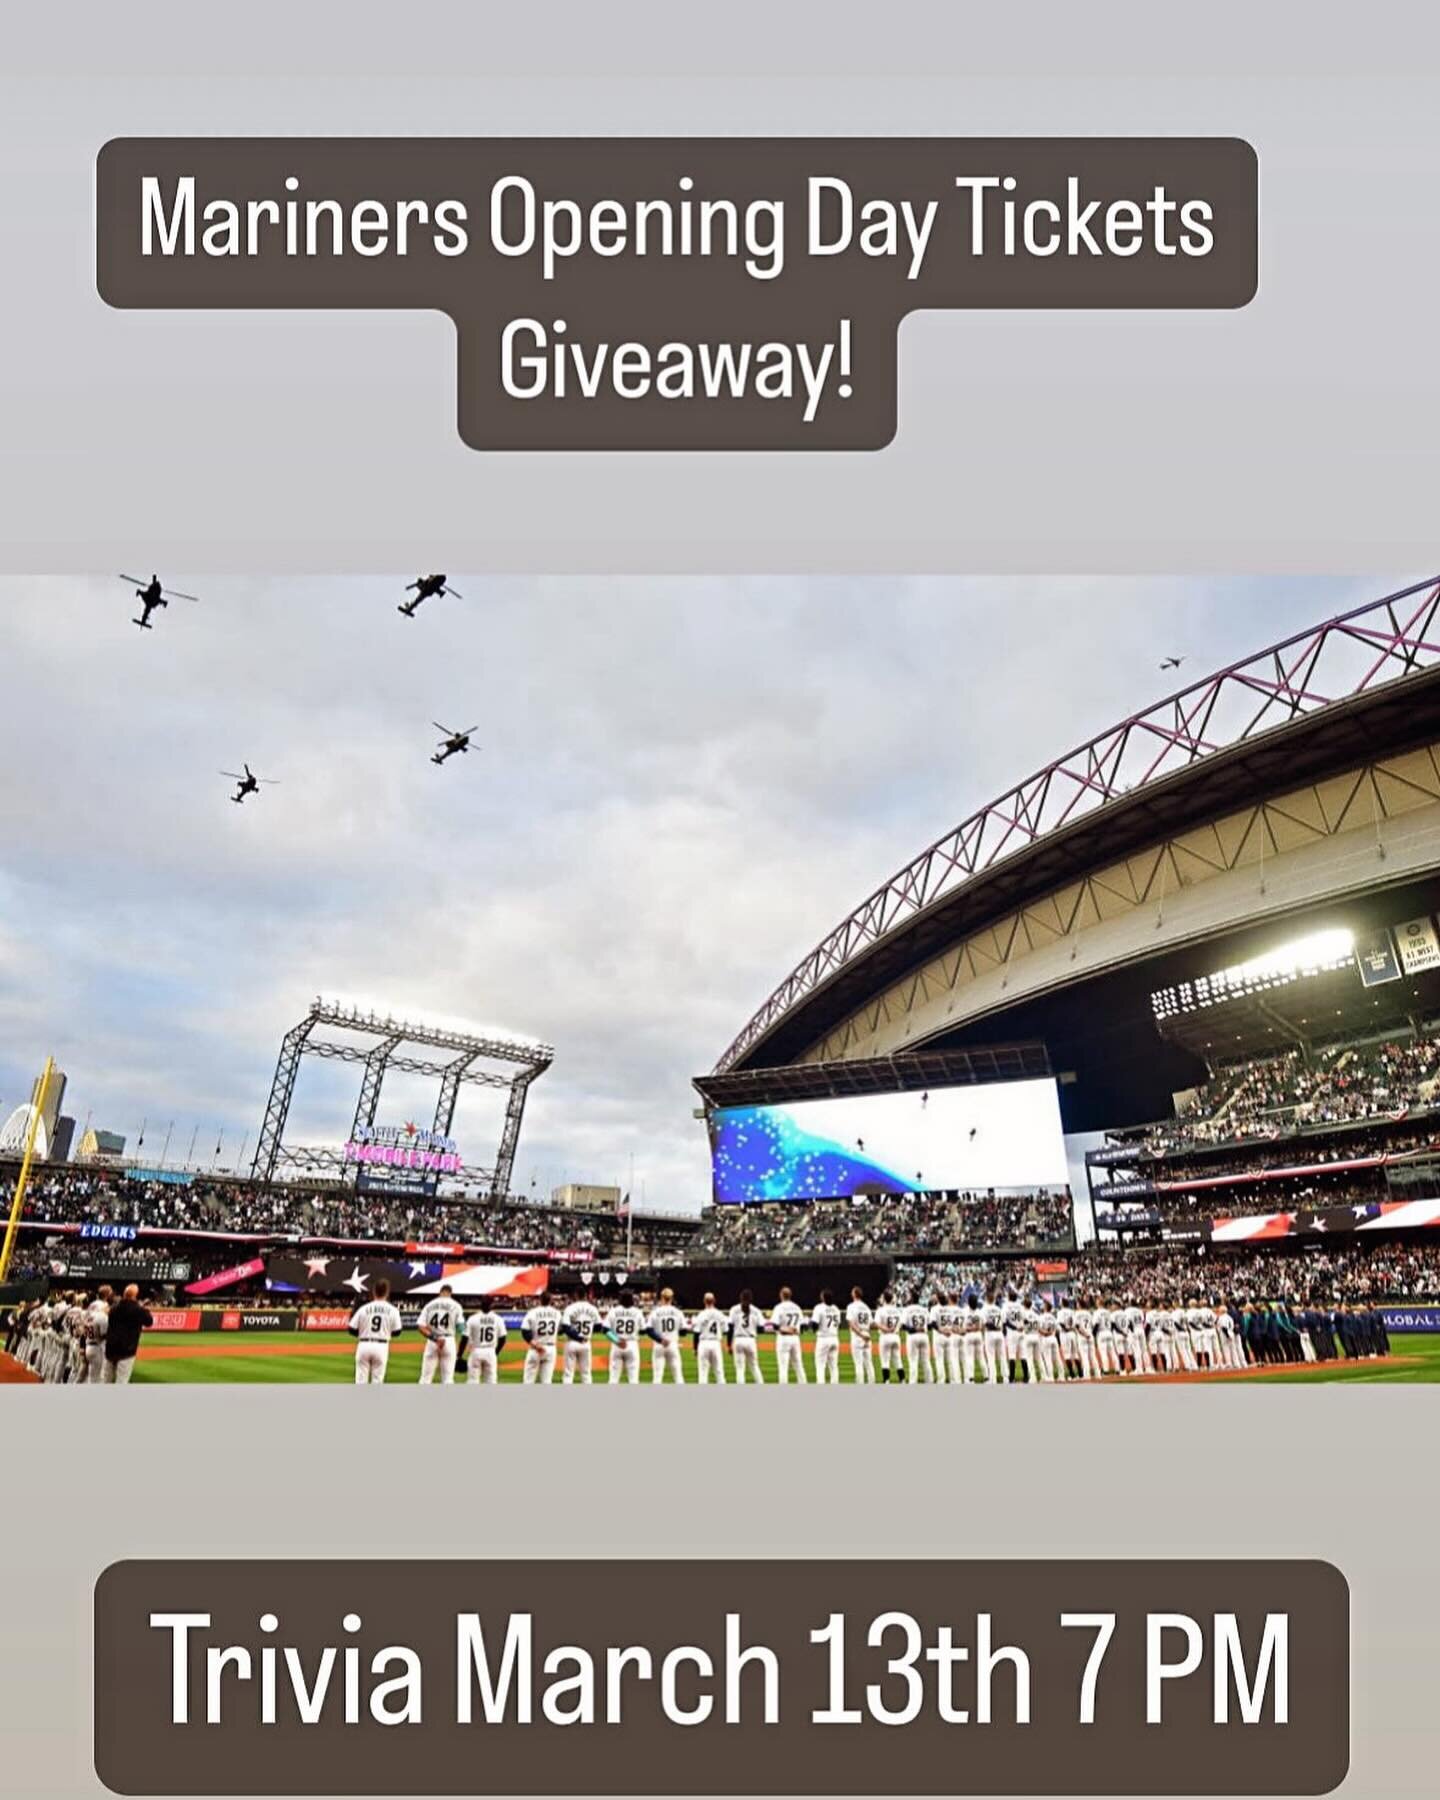 Tonight! Come on down to Trivia to win your Mariners Opening Day Tickets!